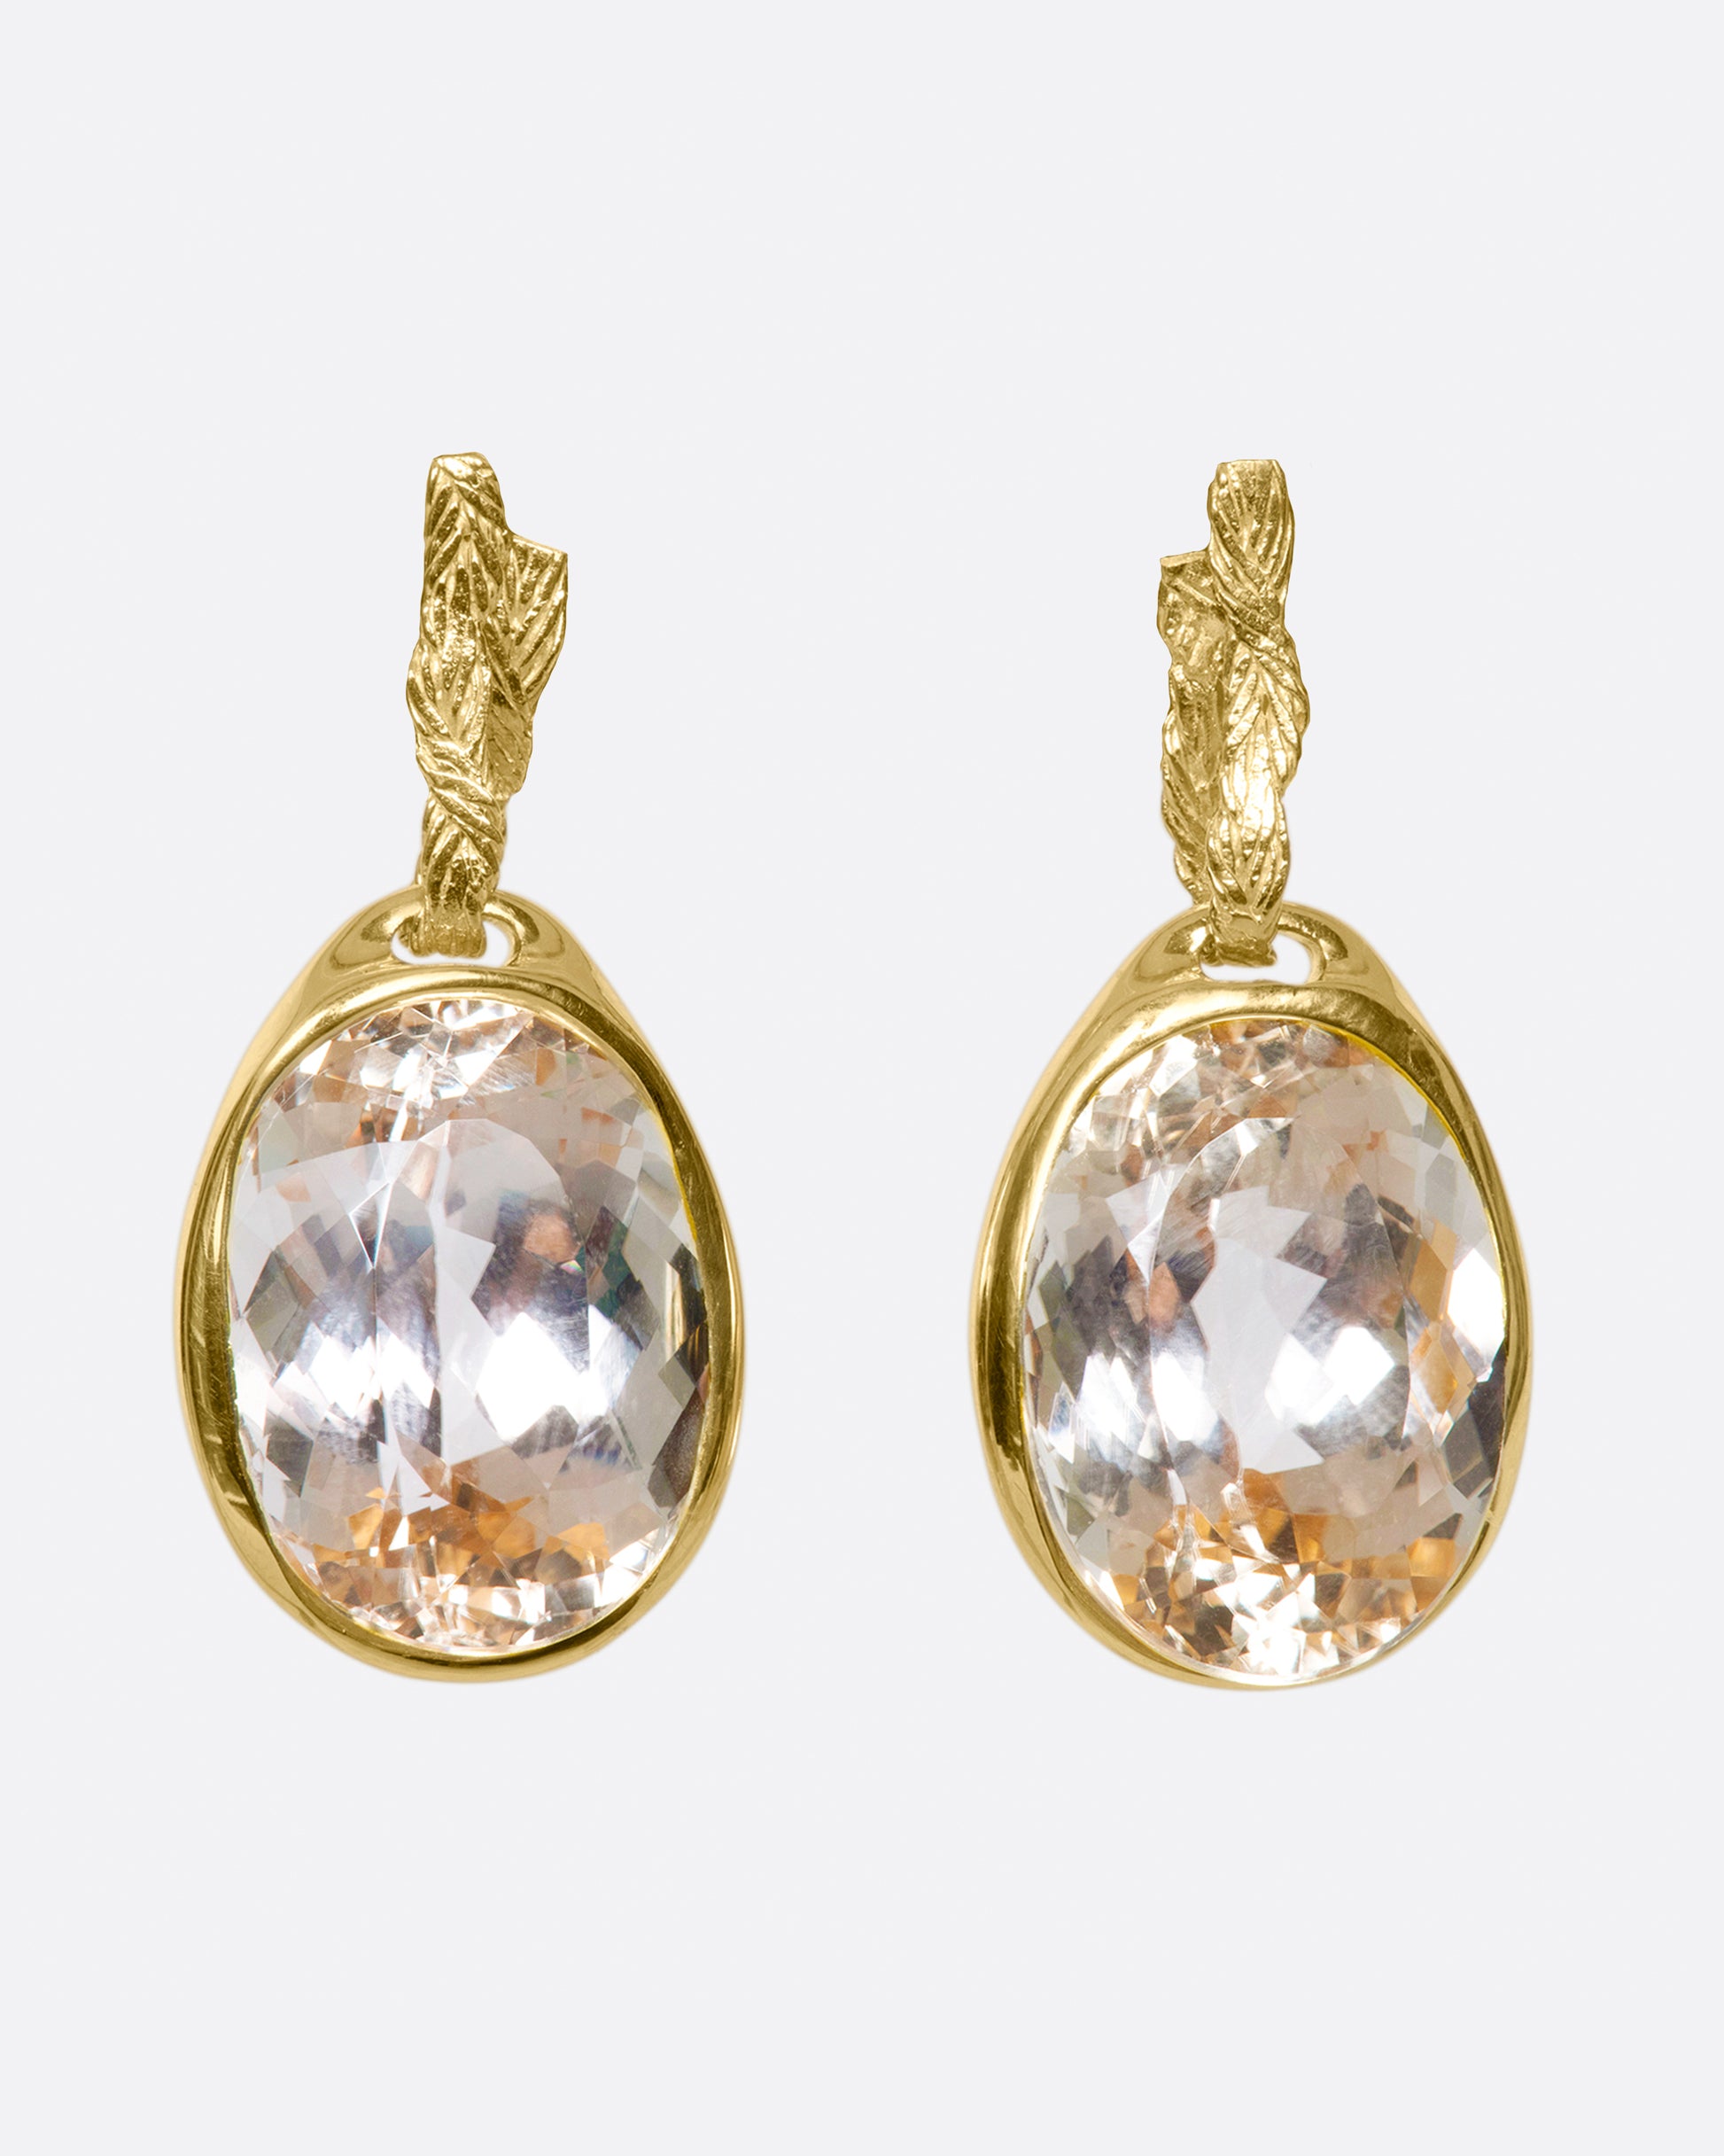 These earrings are all about the mesmerizing, large, pale pink kunzites that they feature.